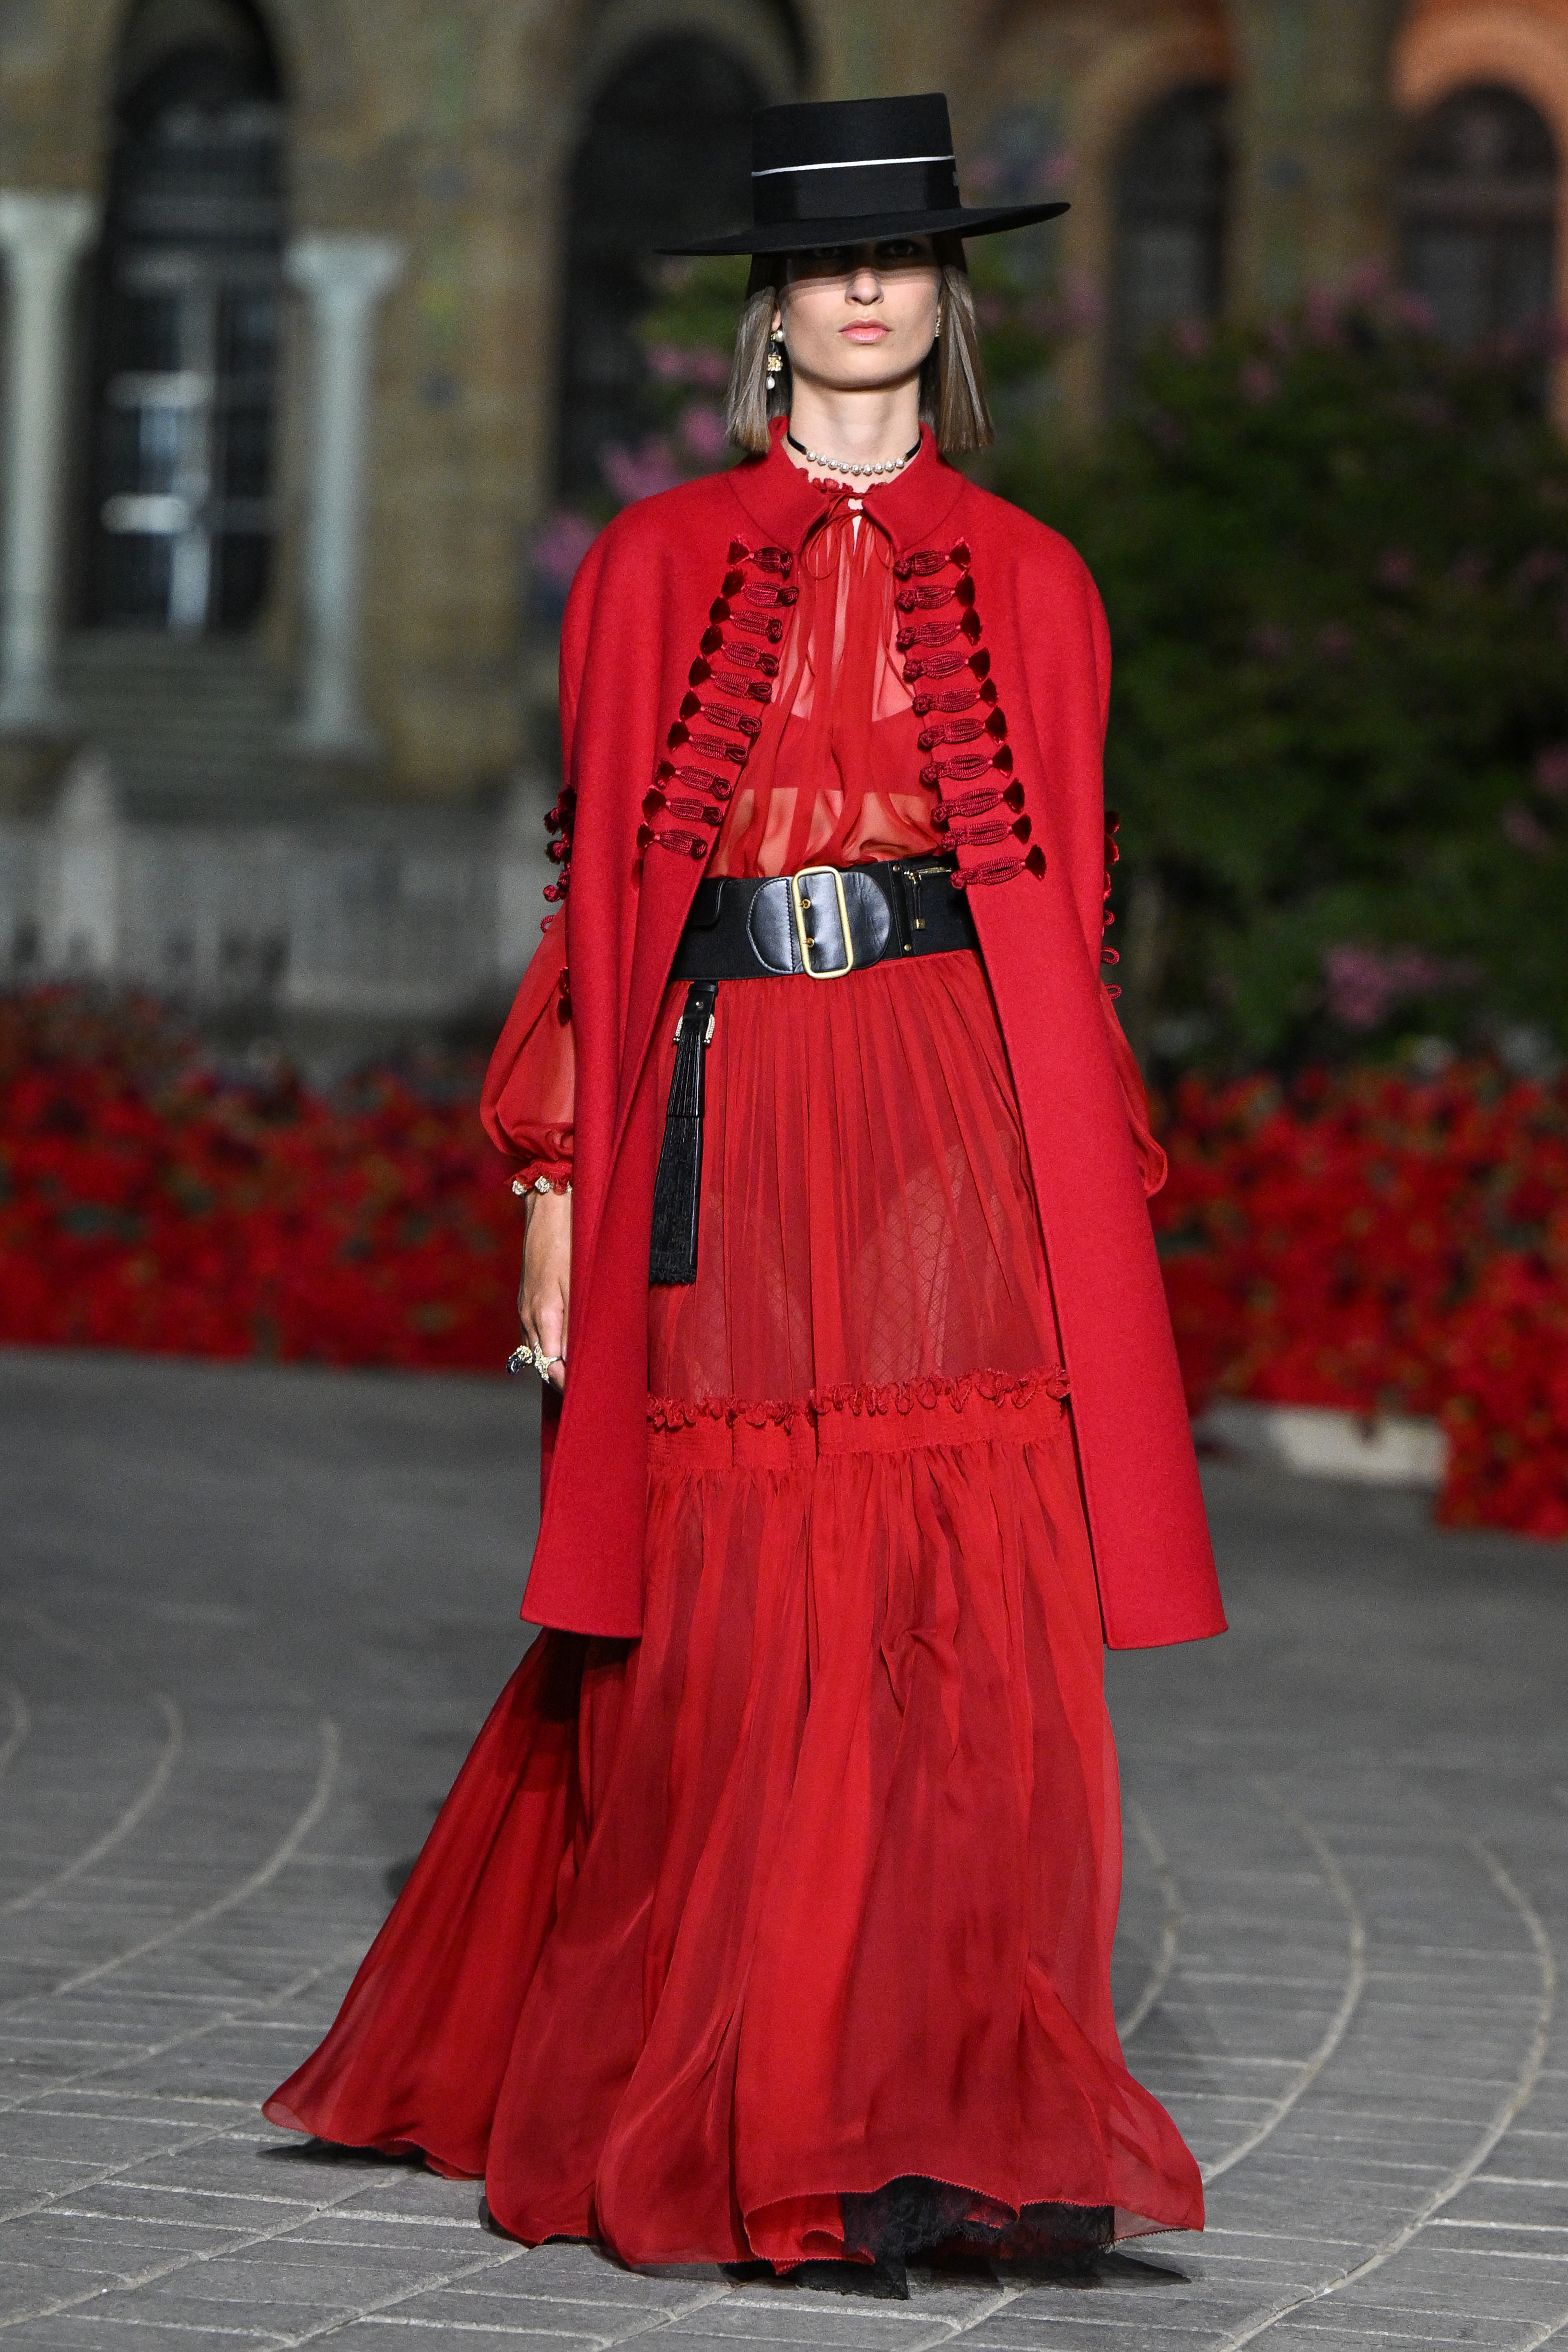 Dior's Seville Cruise Show Is A Love Letter To The South Of Spain